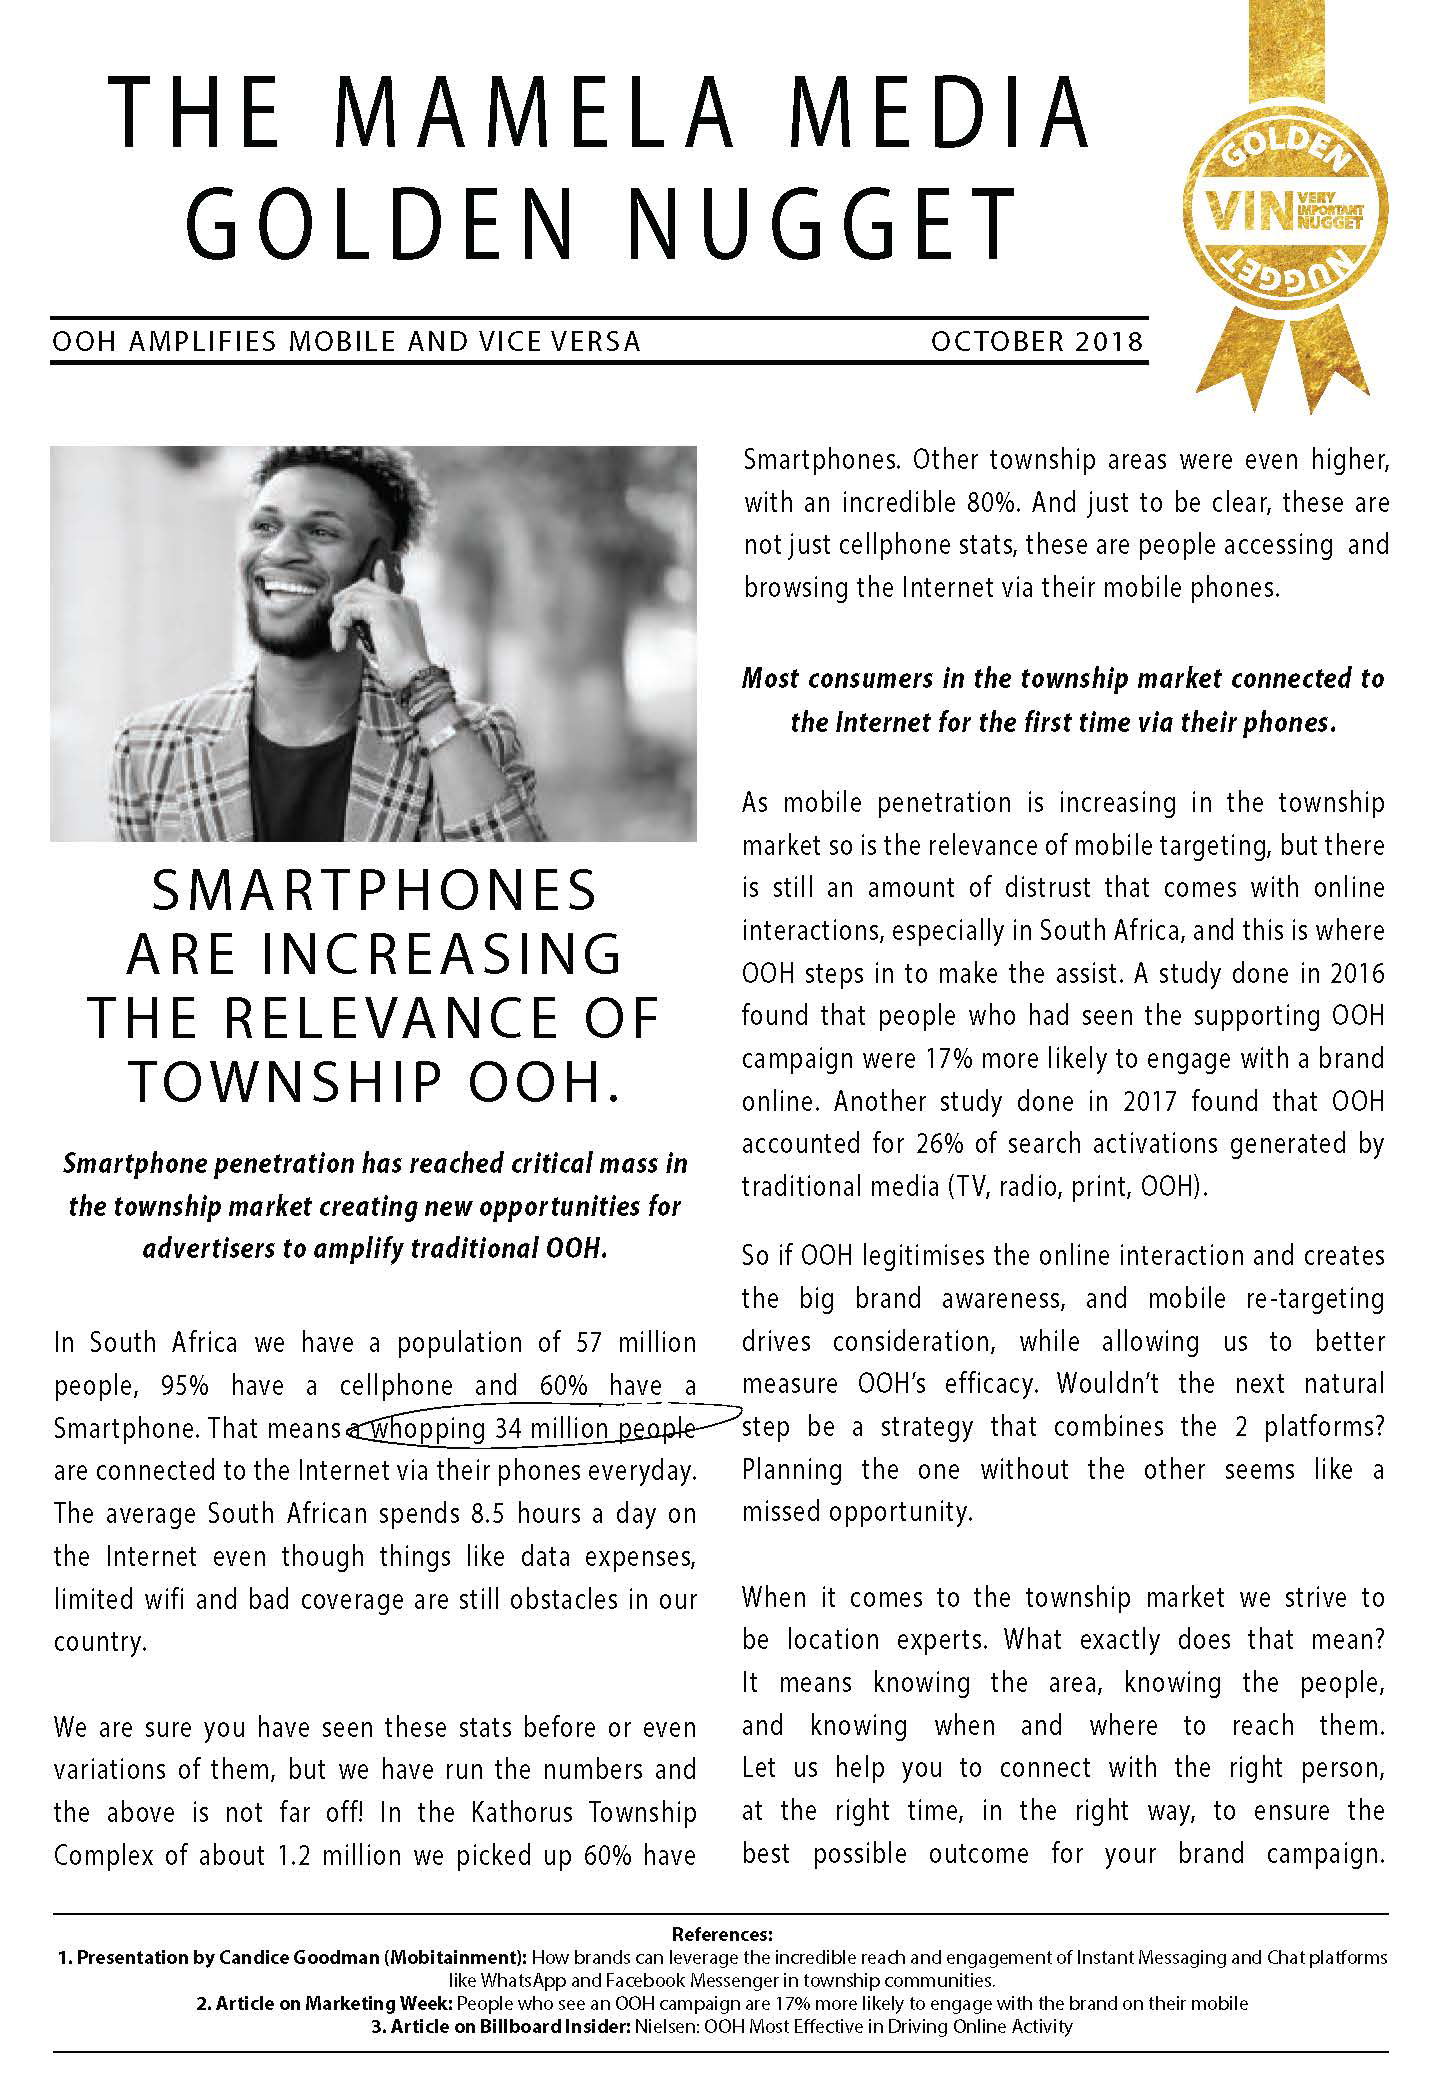 Township Smartphones. Are their smart phones in the Townships? How many smart phones in the township market?